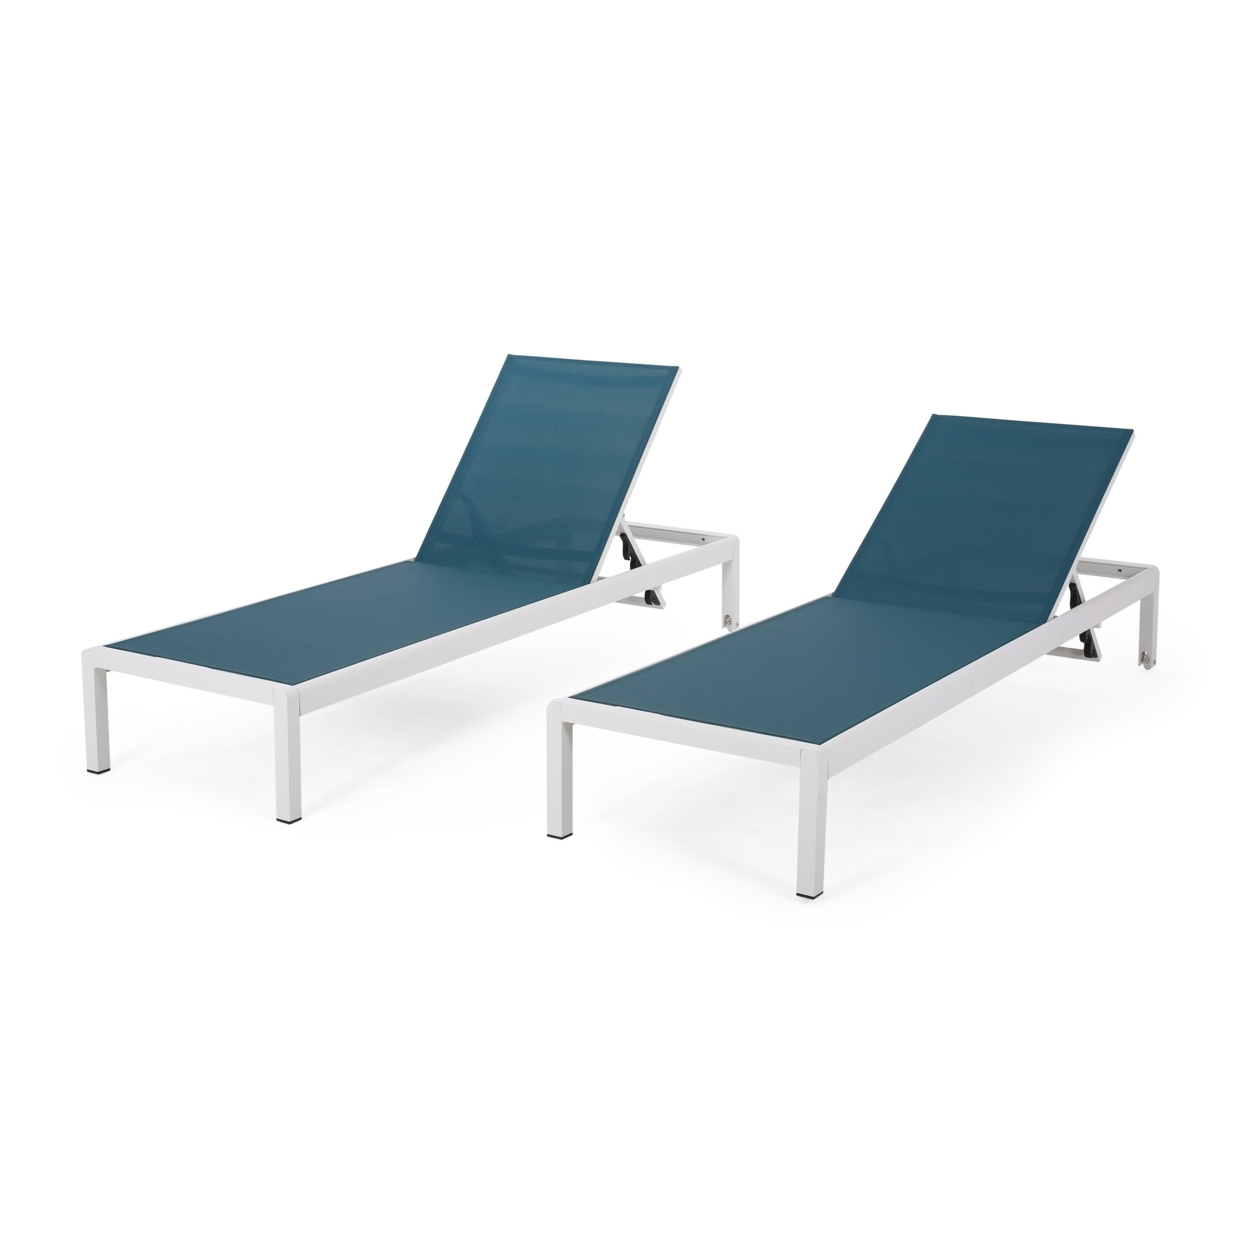 Cherie Outdoor Chaise Lounges (Set Of 2) - Blue/white